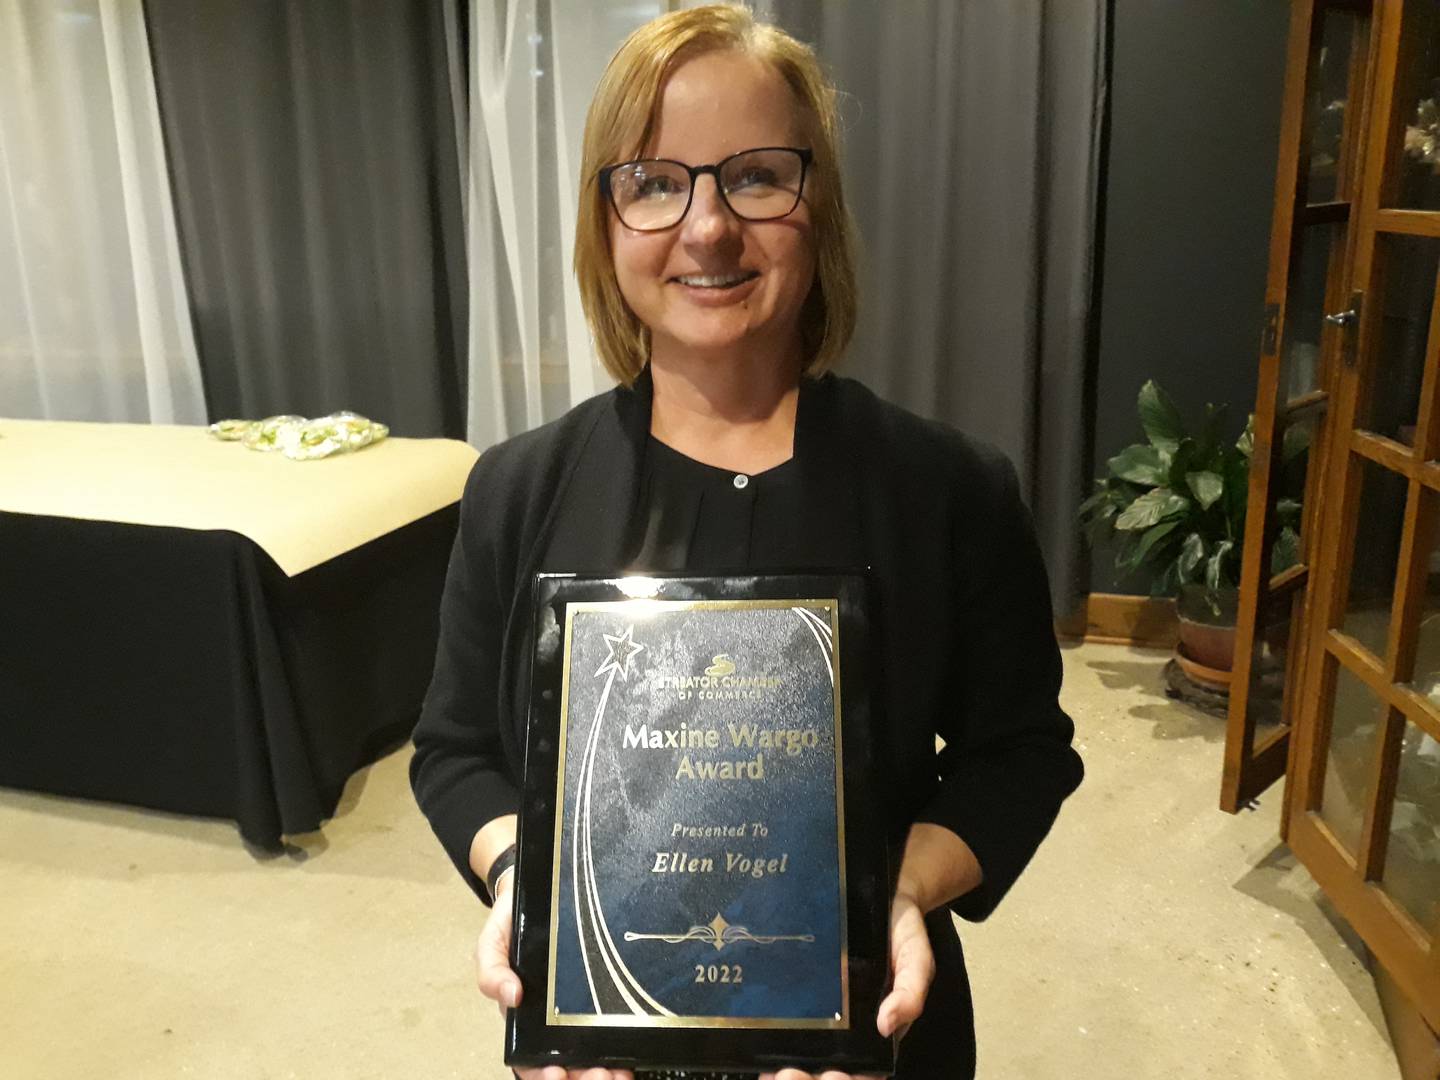 Ellen Vogel, of OSF and Live Well Streator, was named the Maxine Wargo Award winner at the Streator Chamber's 109th annual meeting Monday, Sept. 19, 2022. The award is given to an individual who stands out for their volunteer work to the city.